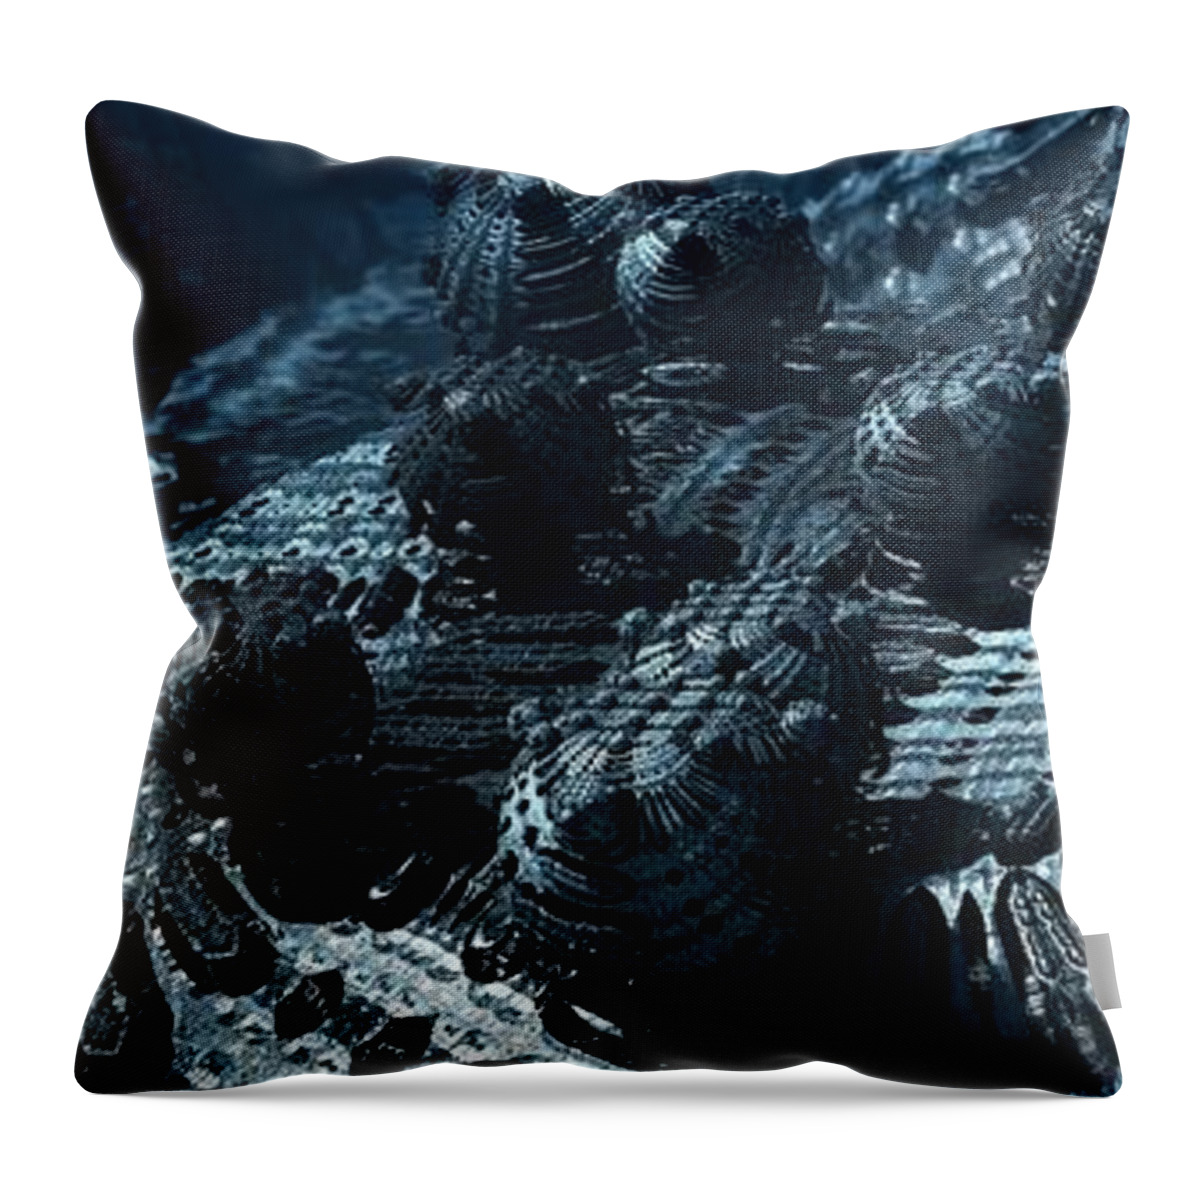 Fractal Throw Pillow featuring the digital art Bumps In The Night by Jon Munson II